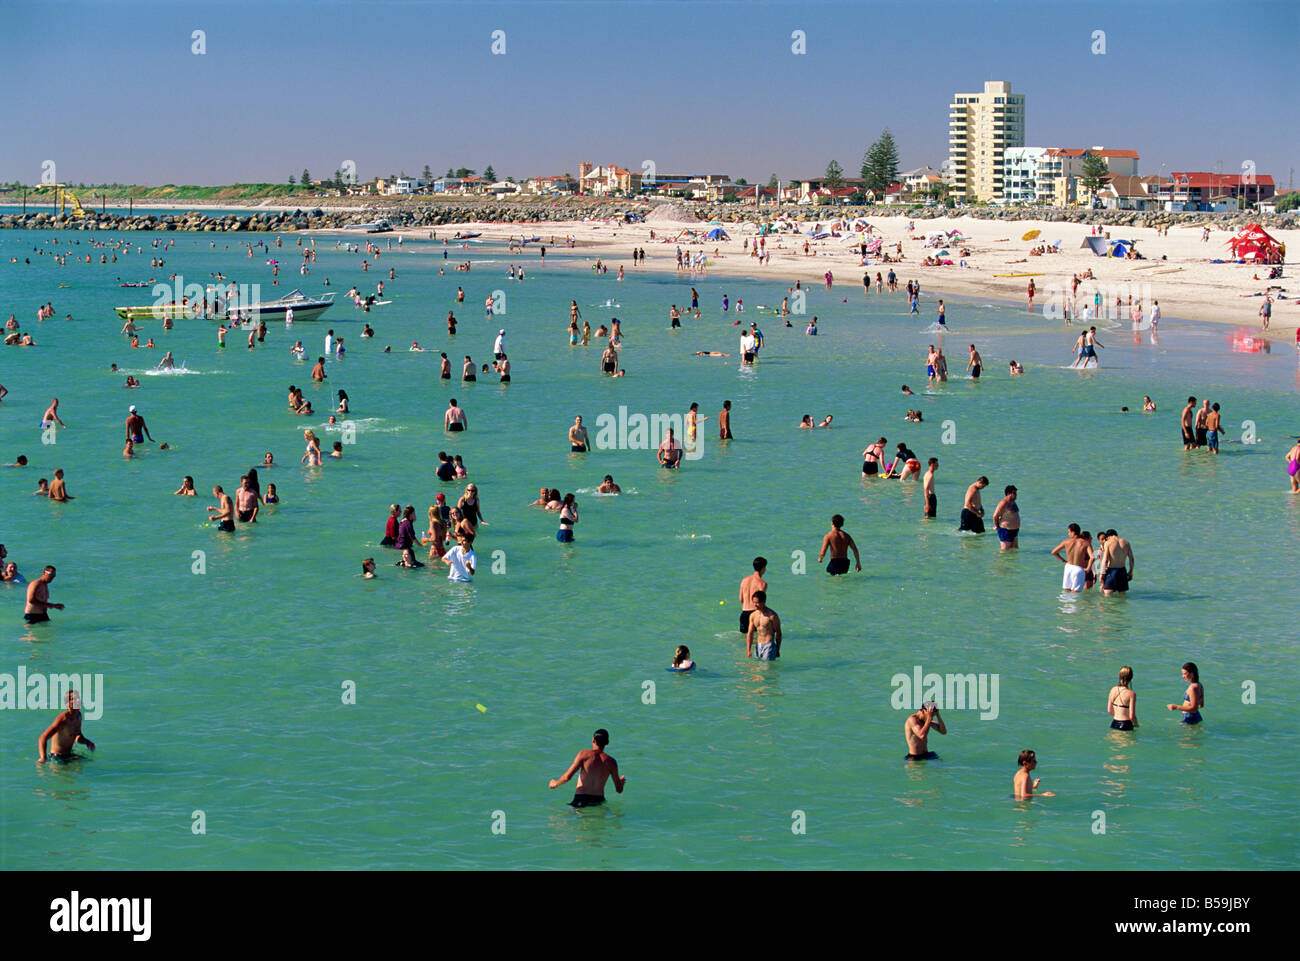 Groups of people in the sea and on the beach at Glenelg, where first South Australian colonists landed, Australia Stock Photo